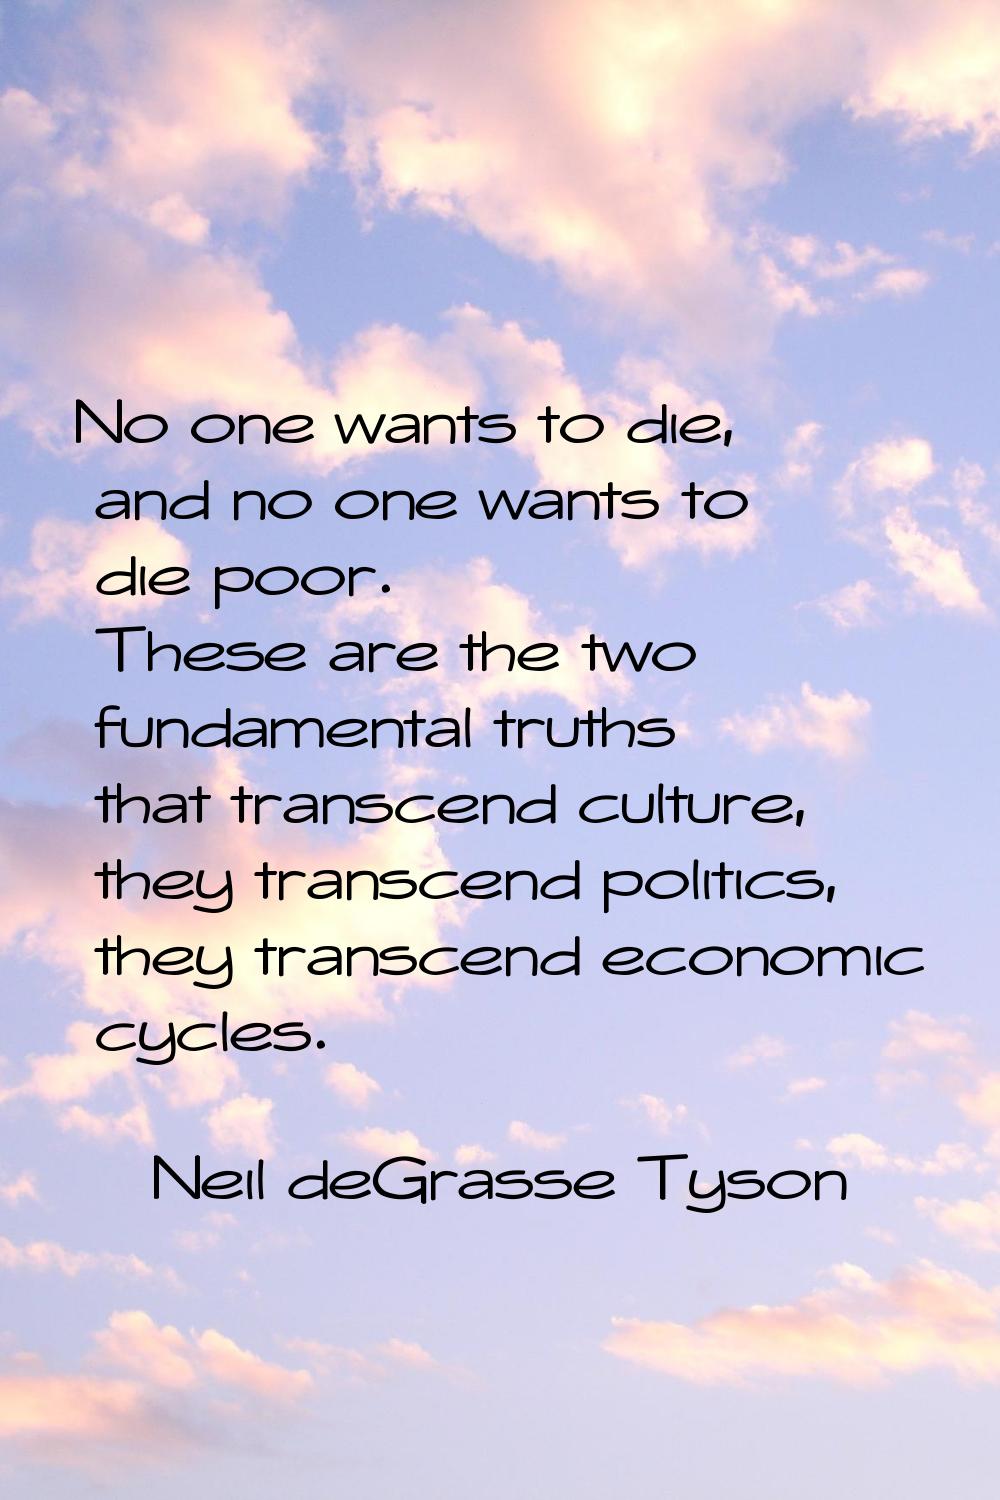 No one wants to die, and no one wants to die poor. These are the two fundamental truths that transc